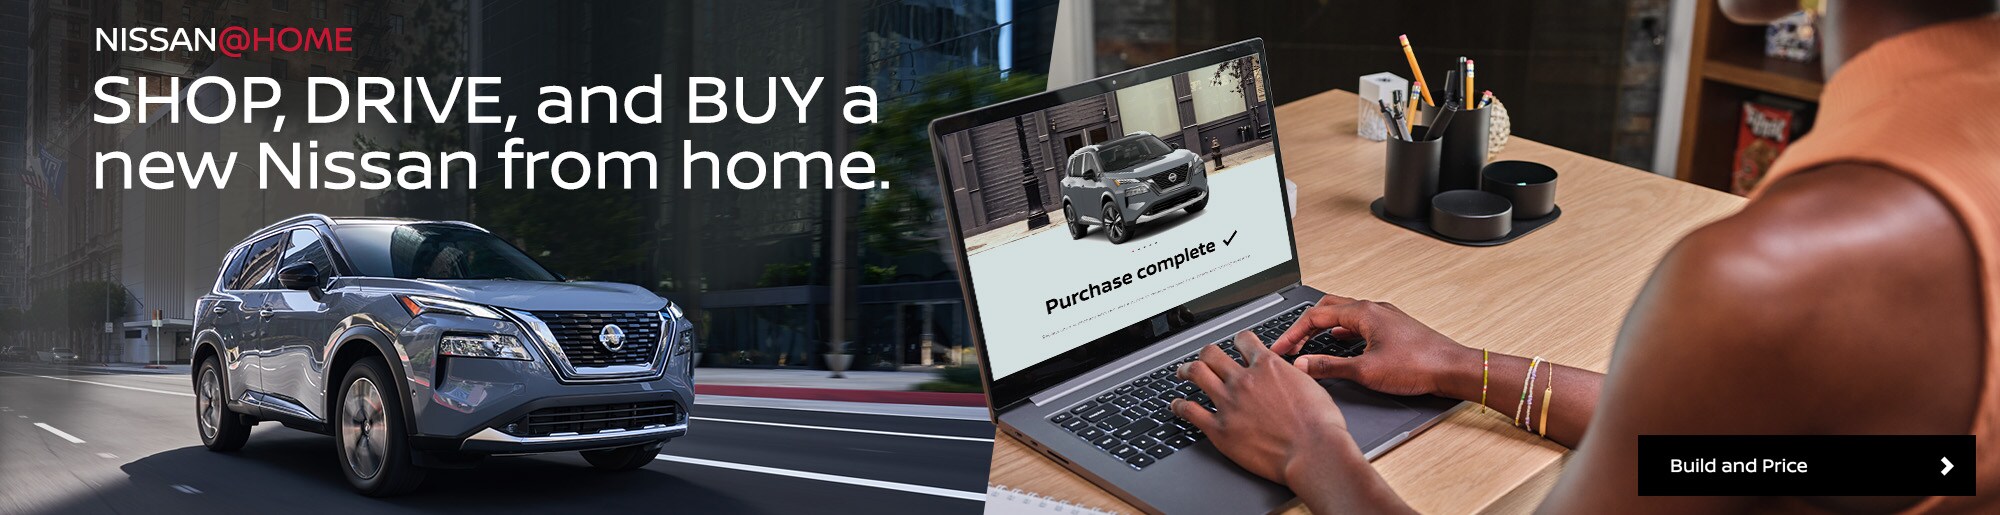 Nissan Buy@Home Banner for buying a Nissan online in Evansville Indiana